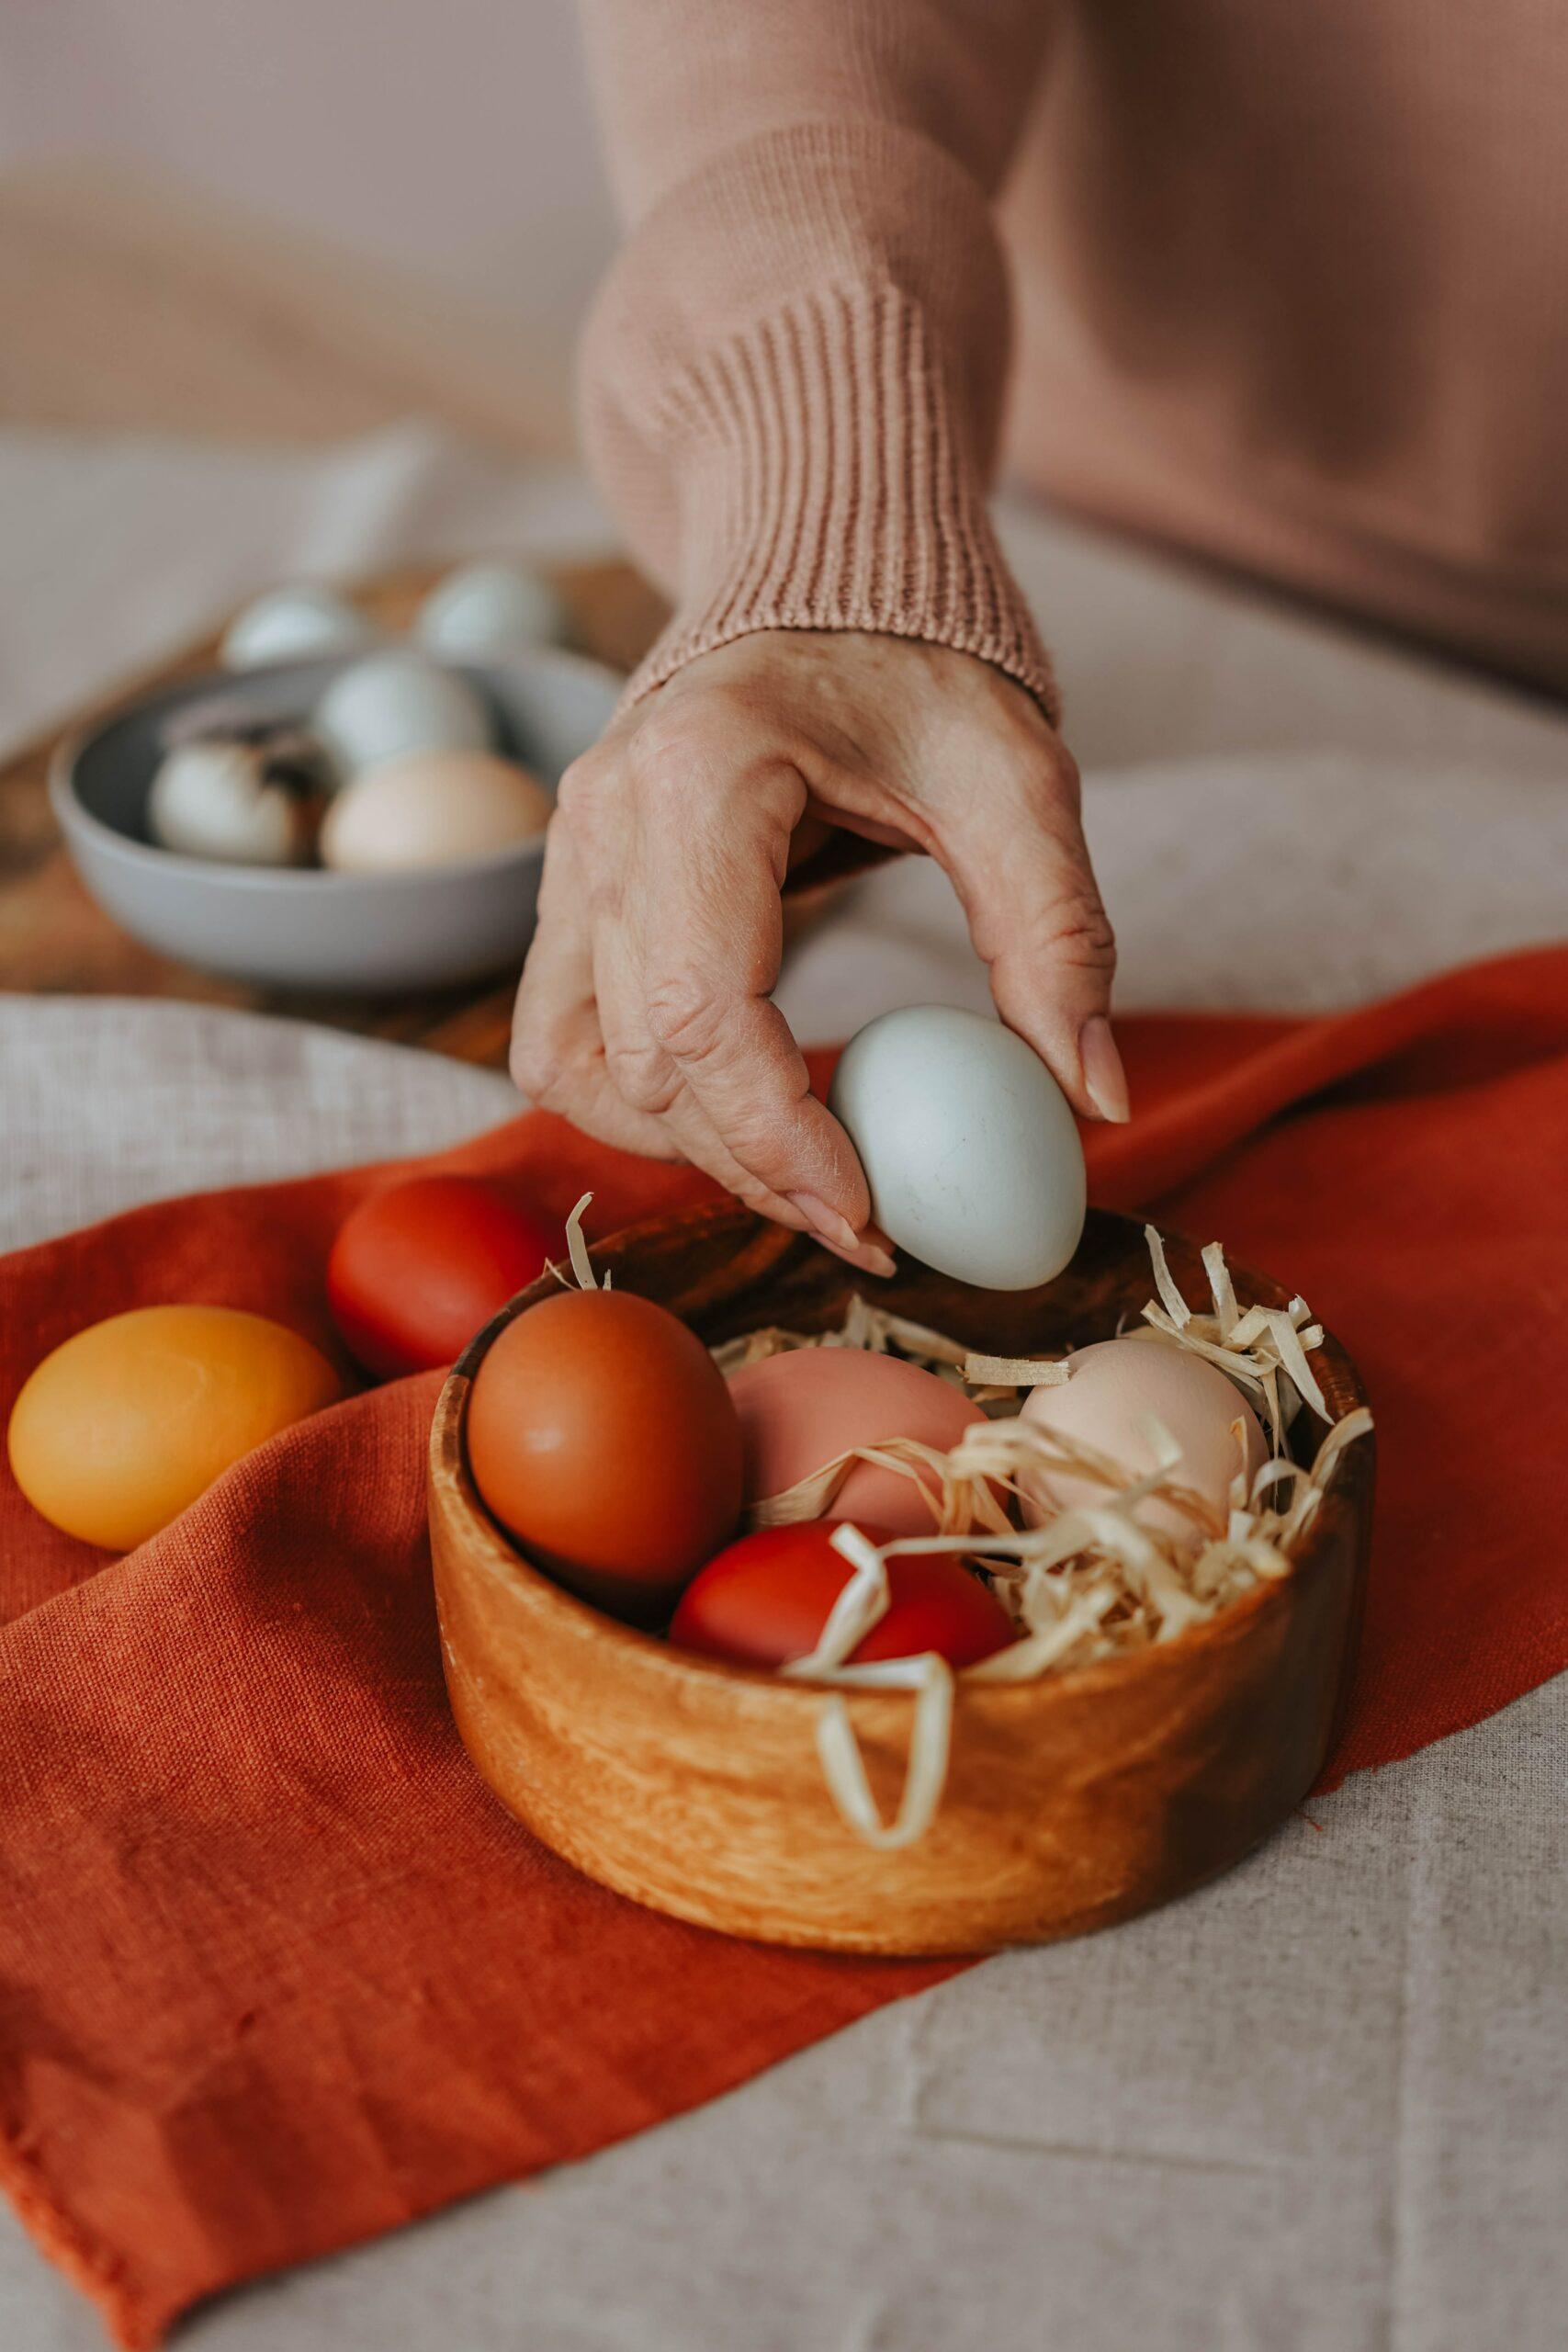 A hand placing a light blue egg into a wooden bowl with other eggs (pink, red, and orange)